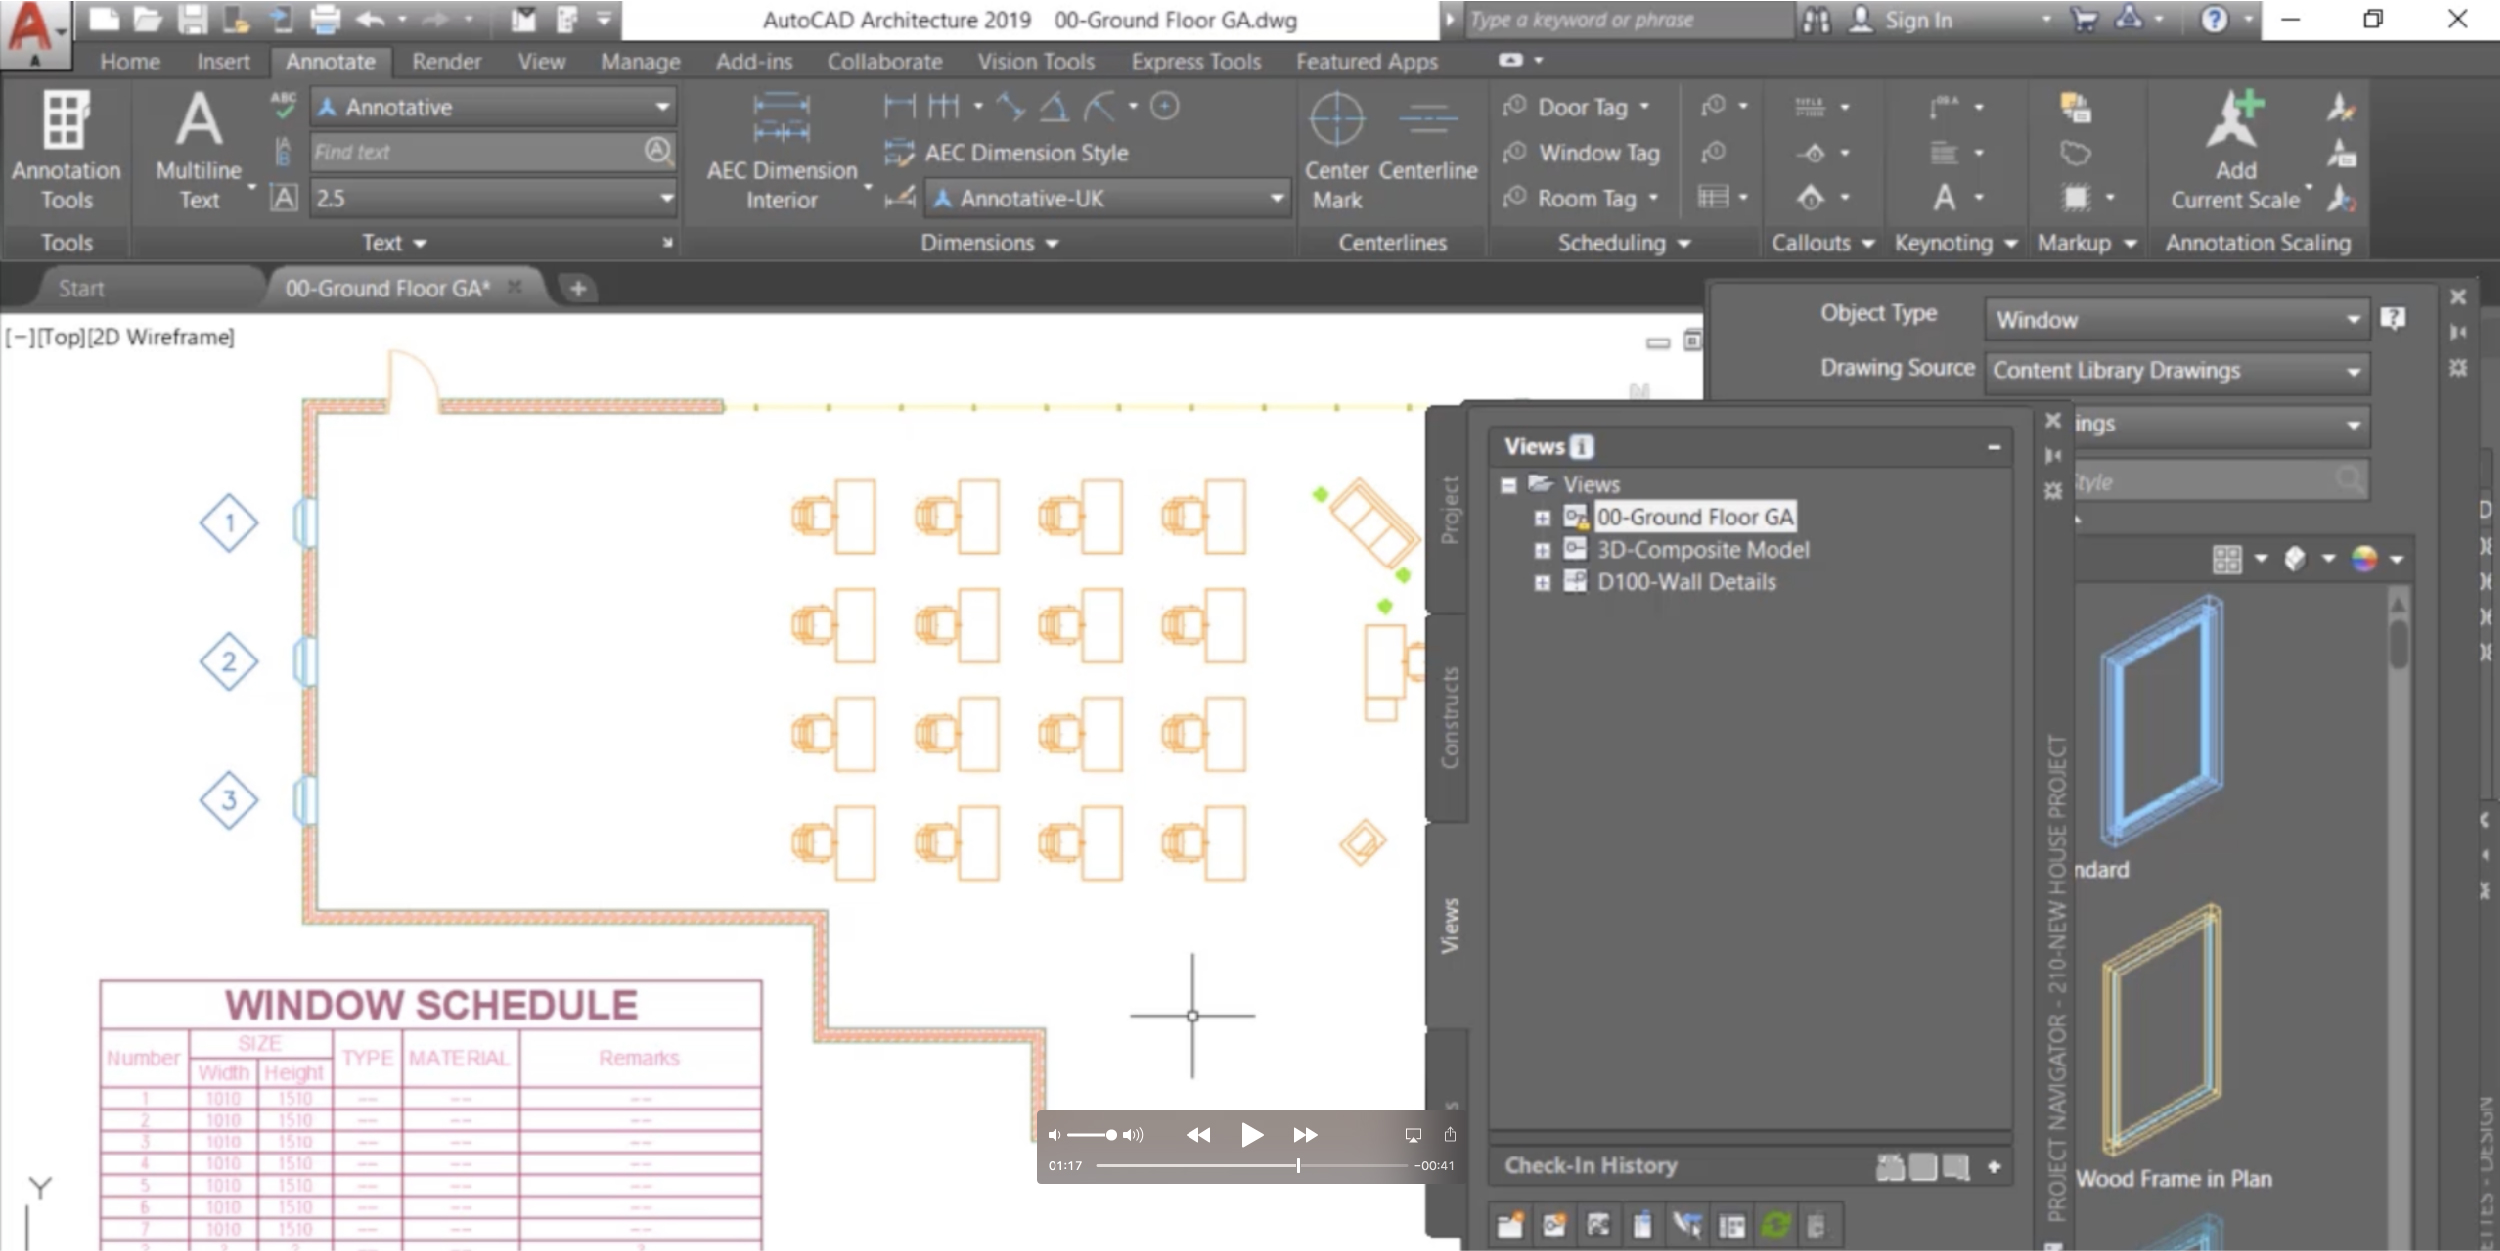 Architecture toolset in new AutoCAD